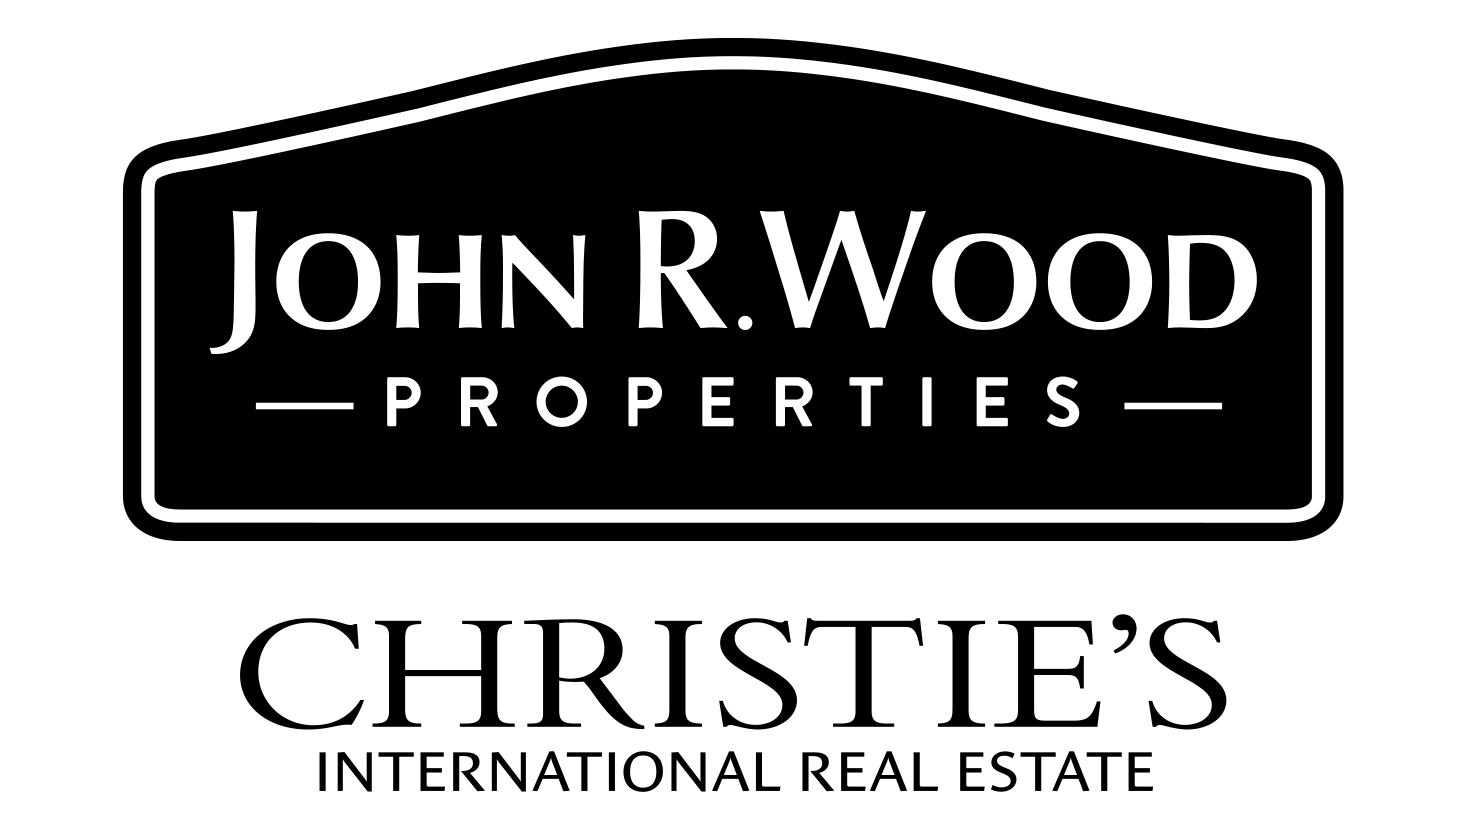 Sonja Pound is with John R. Wood Properties | Christie's International Real Estate